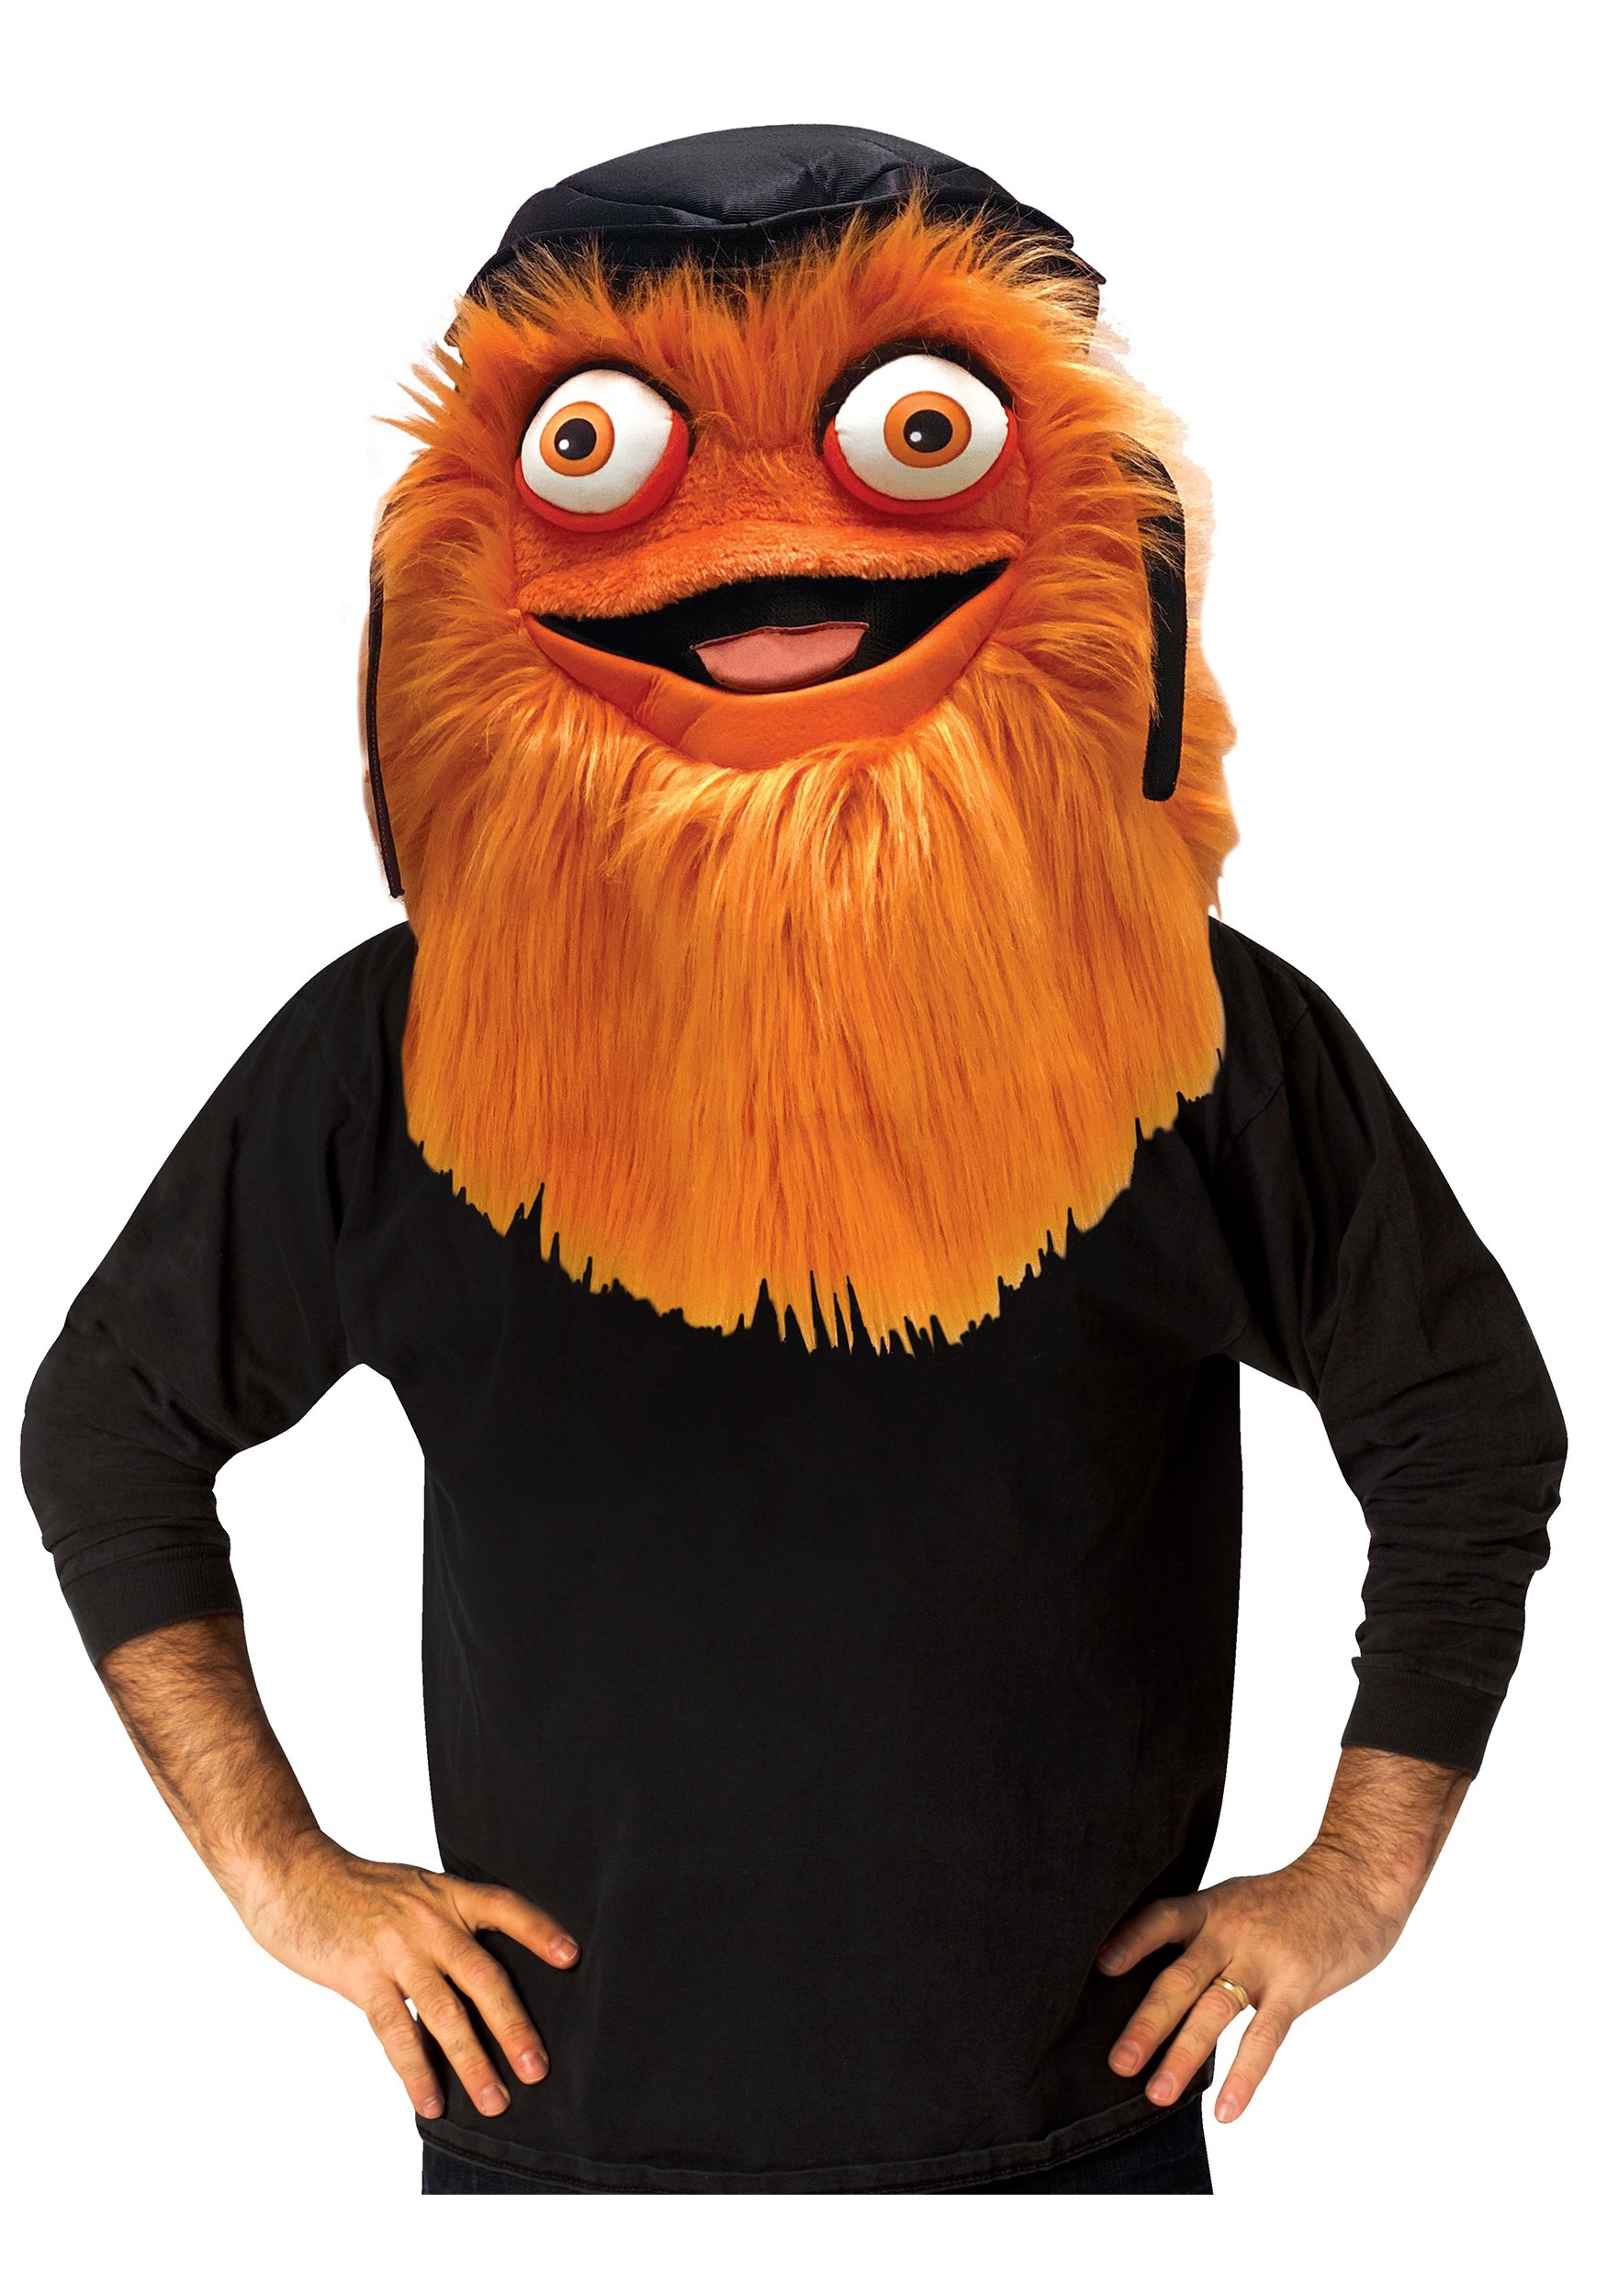 Official NHL Philadelphia Flyers Gritty Mascot Head for Fans